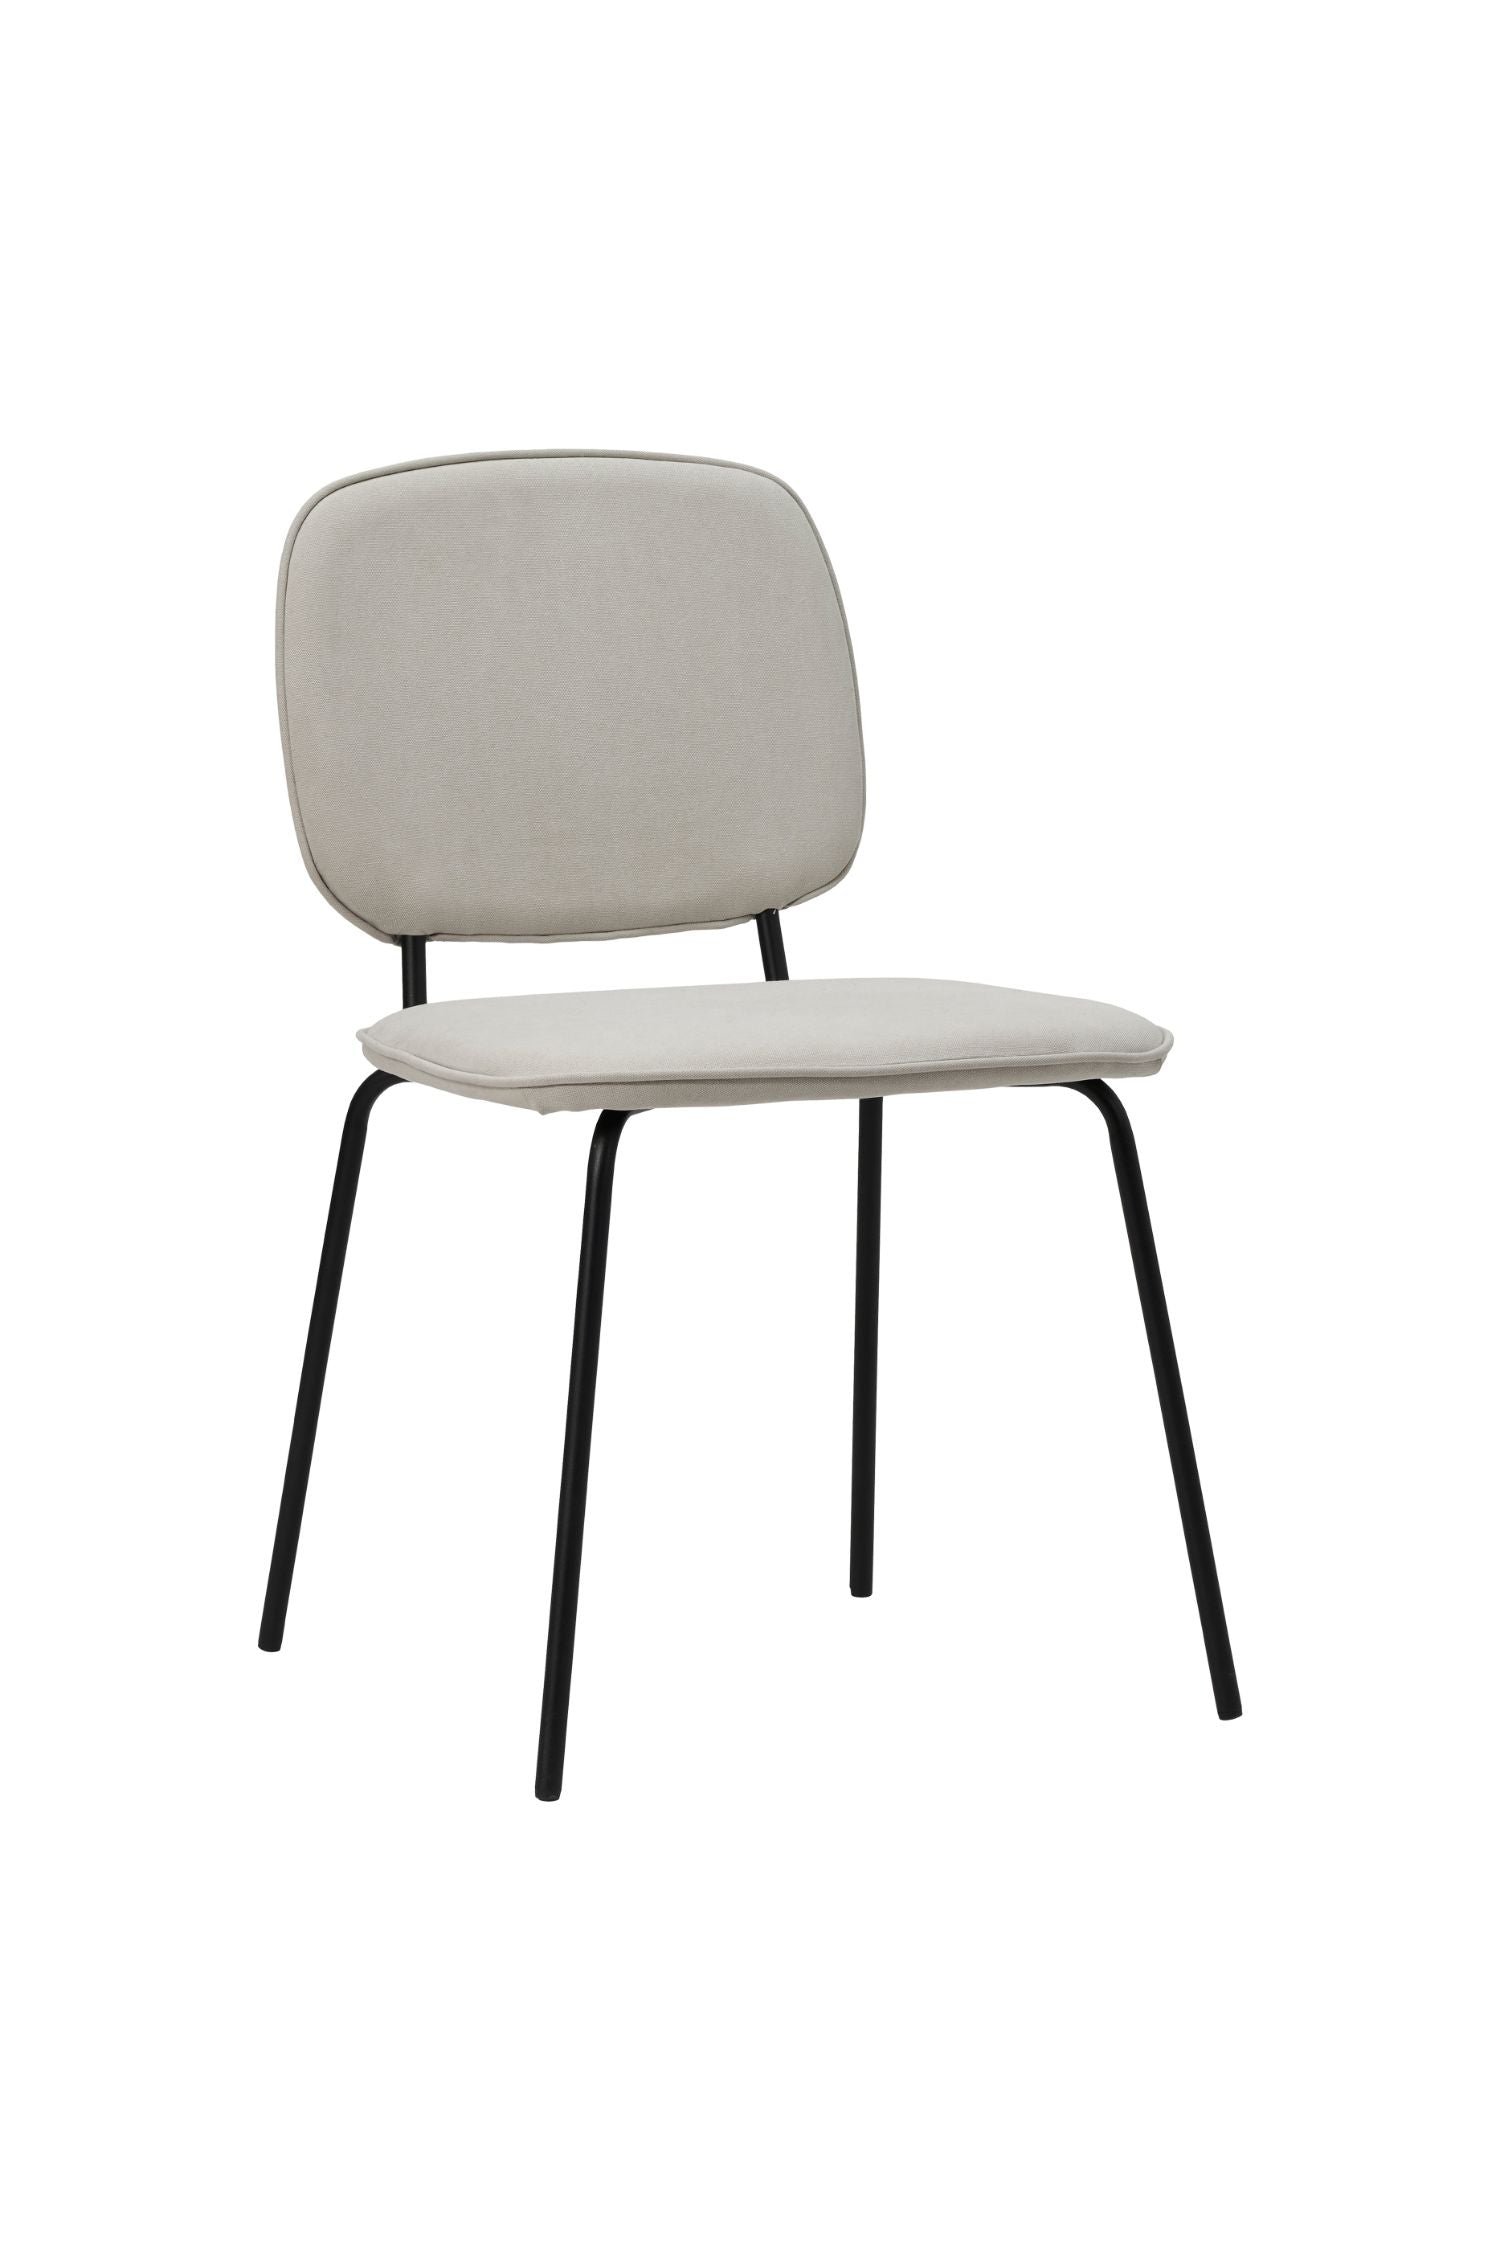 coto chair sand